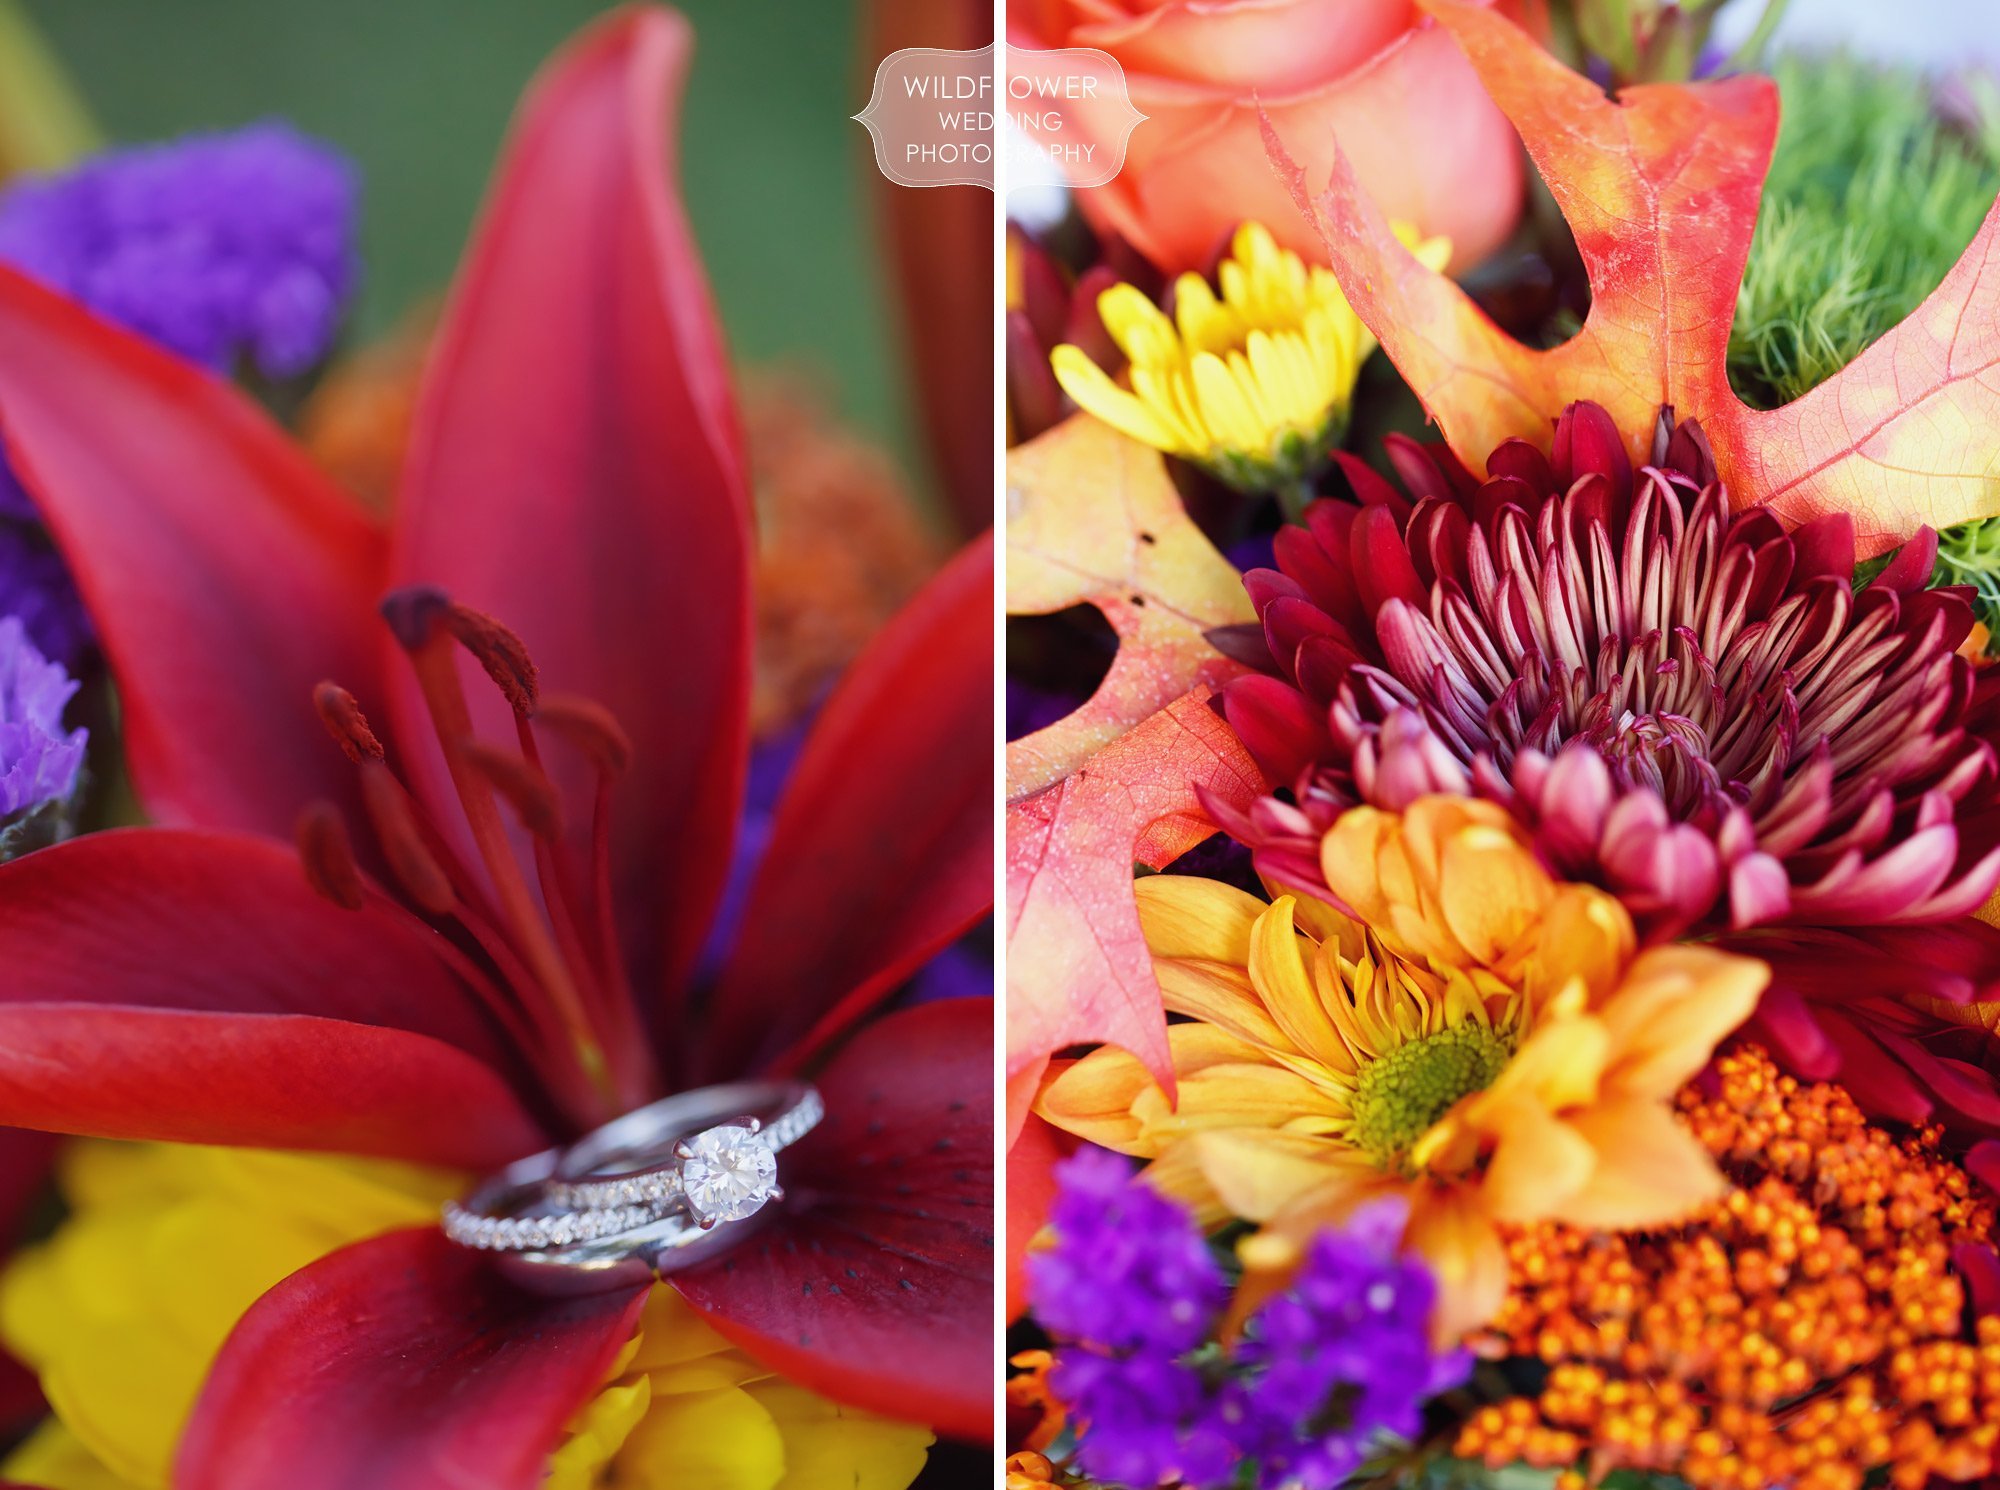 Colorful wedding rings photo with wildflowers for this backyard wedding in St. Louis.